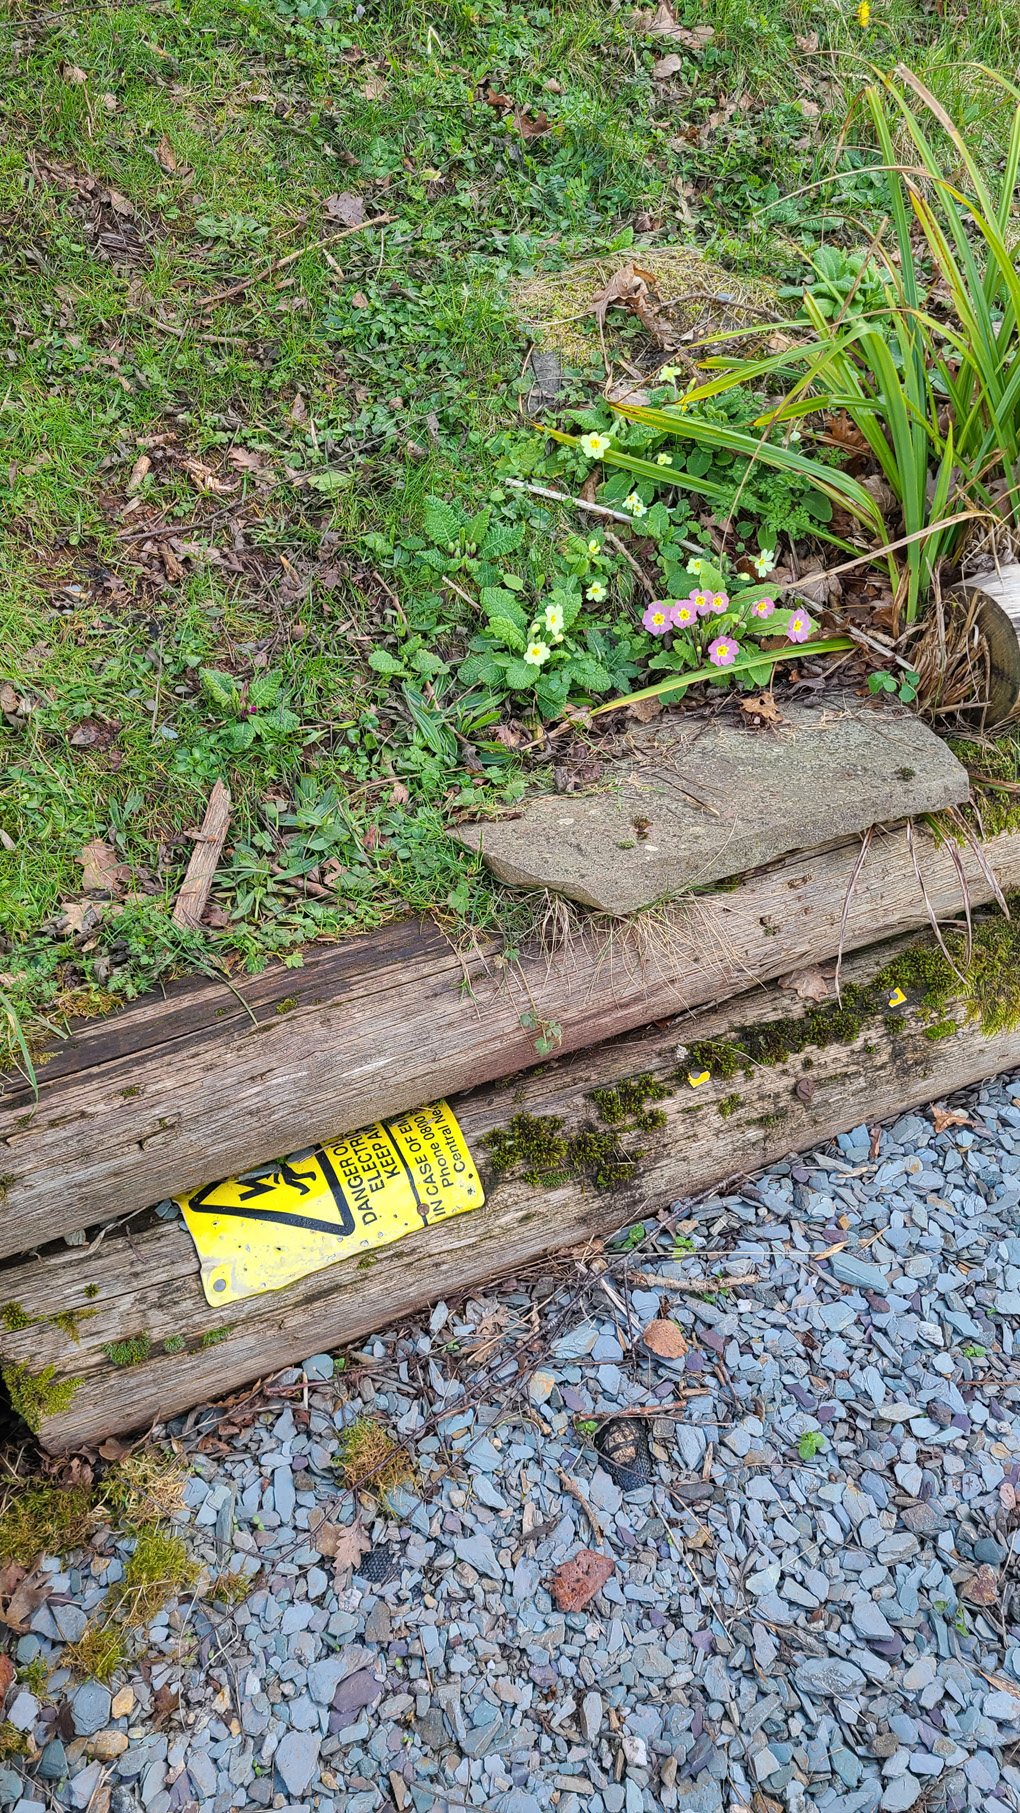 Green grass in the top with spring flowers. An old electric pole is diagonally across the picture, half of the yellow safety sign showing. The bottom third is grey/purple slate chips.